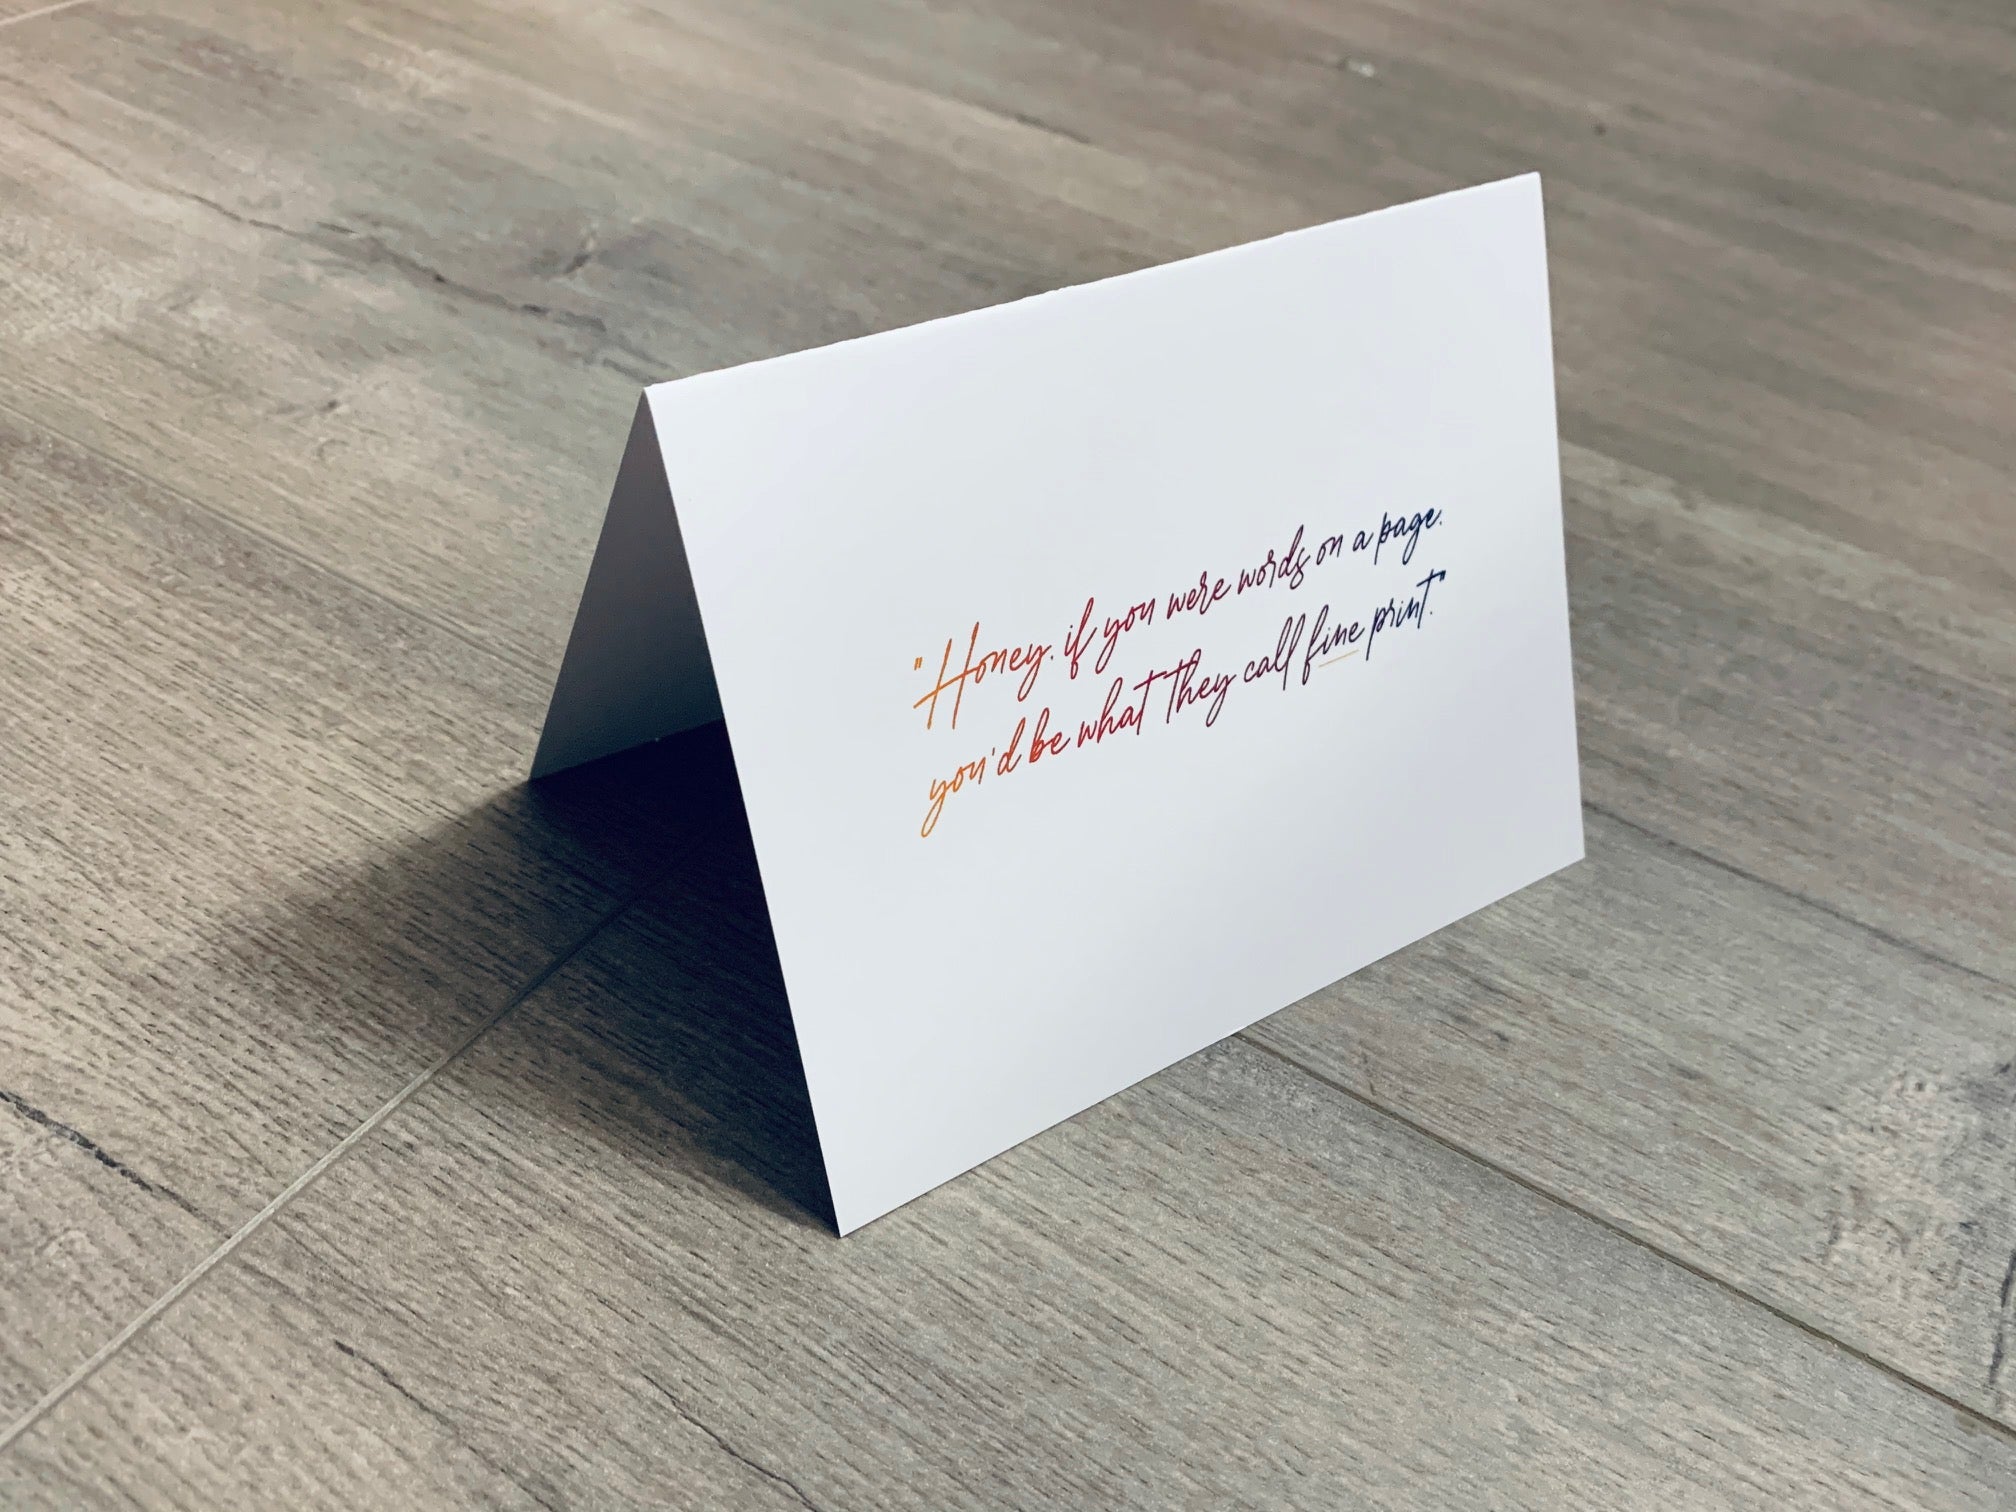 A folded white notecard is propped up on a wooden floor. The card reads, "Honey, if you were words on a page, you'd be what they call fine print." Stationare's Pick Up Lines collection.